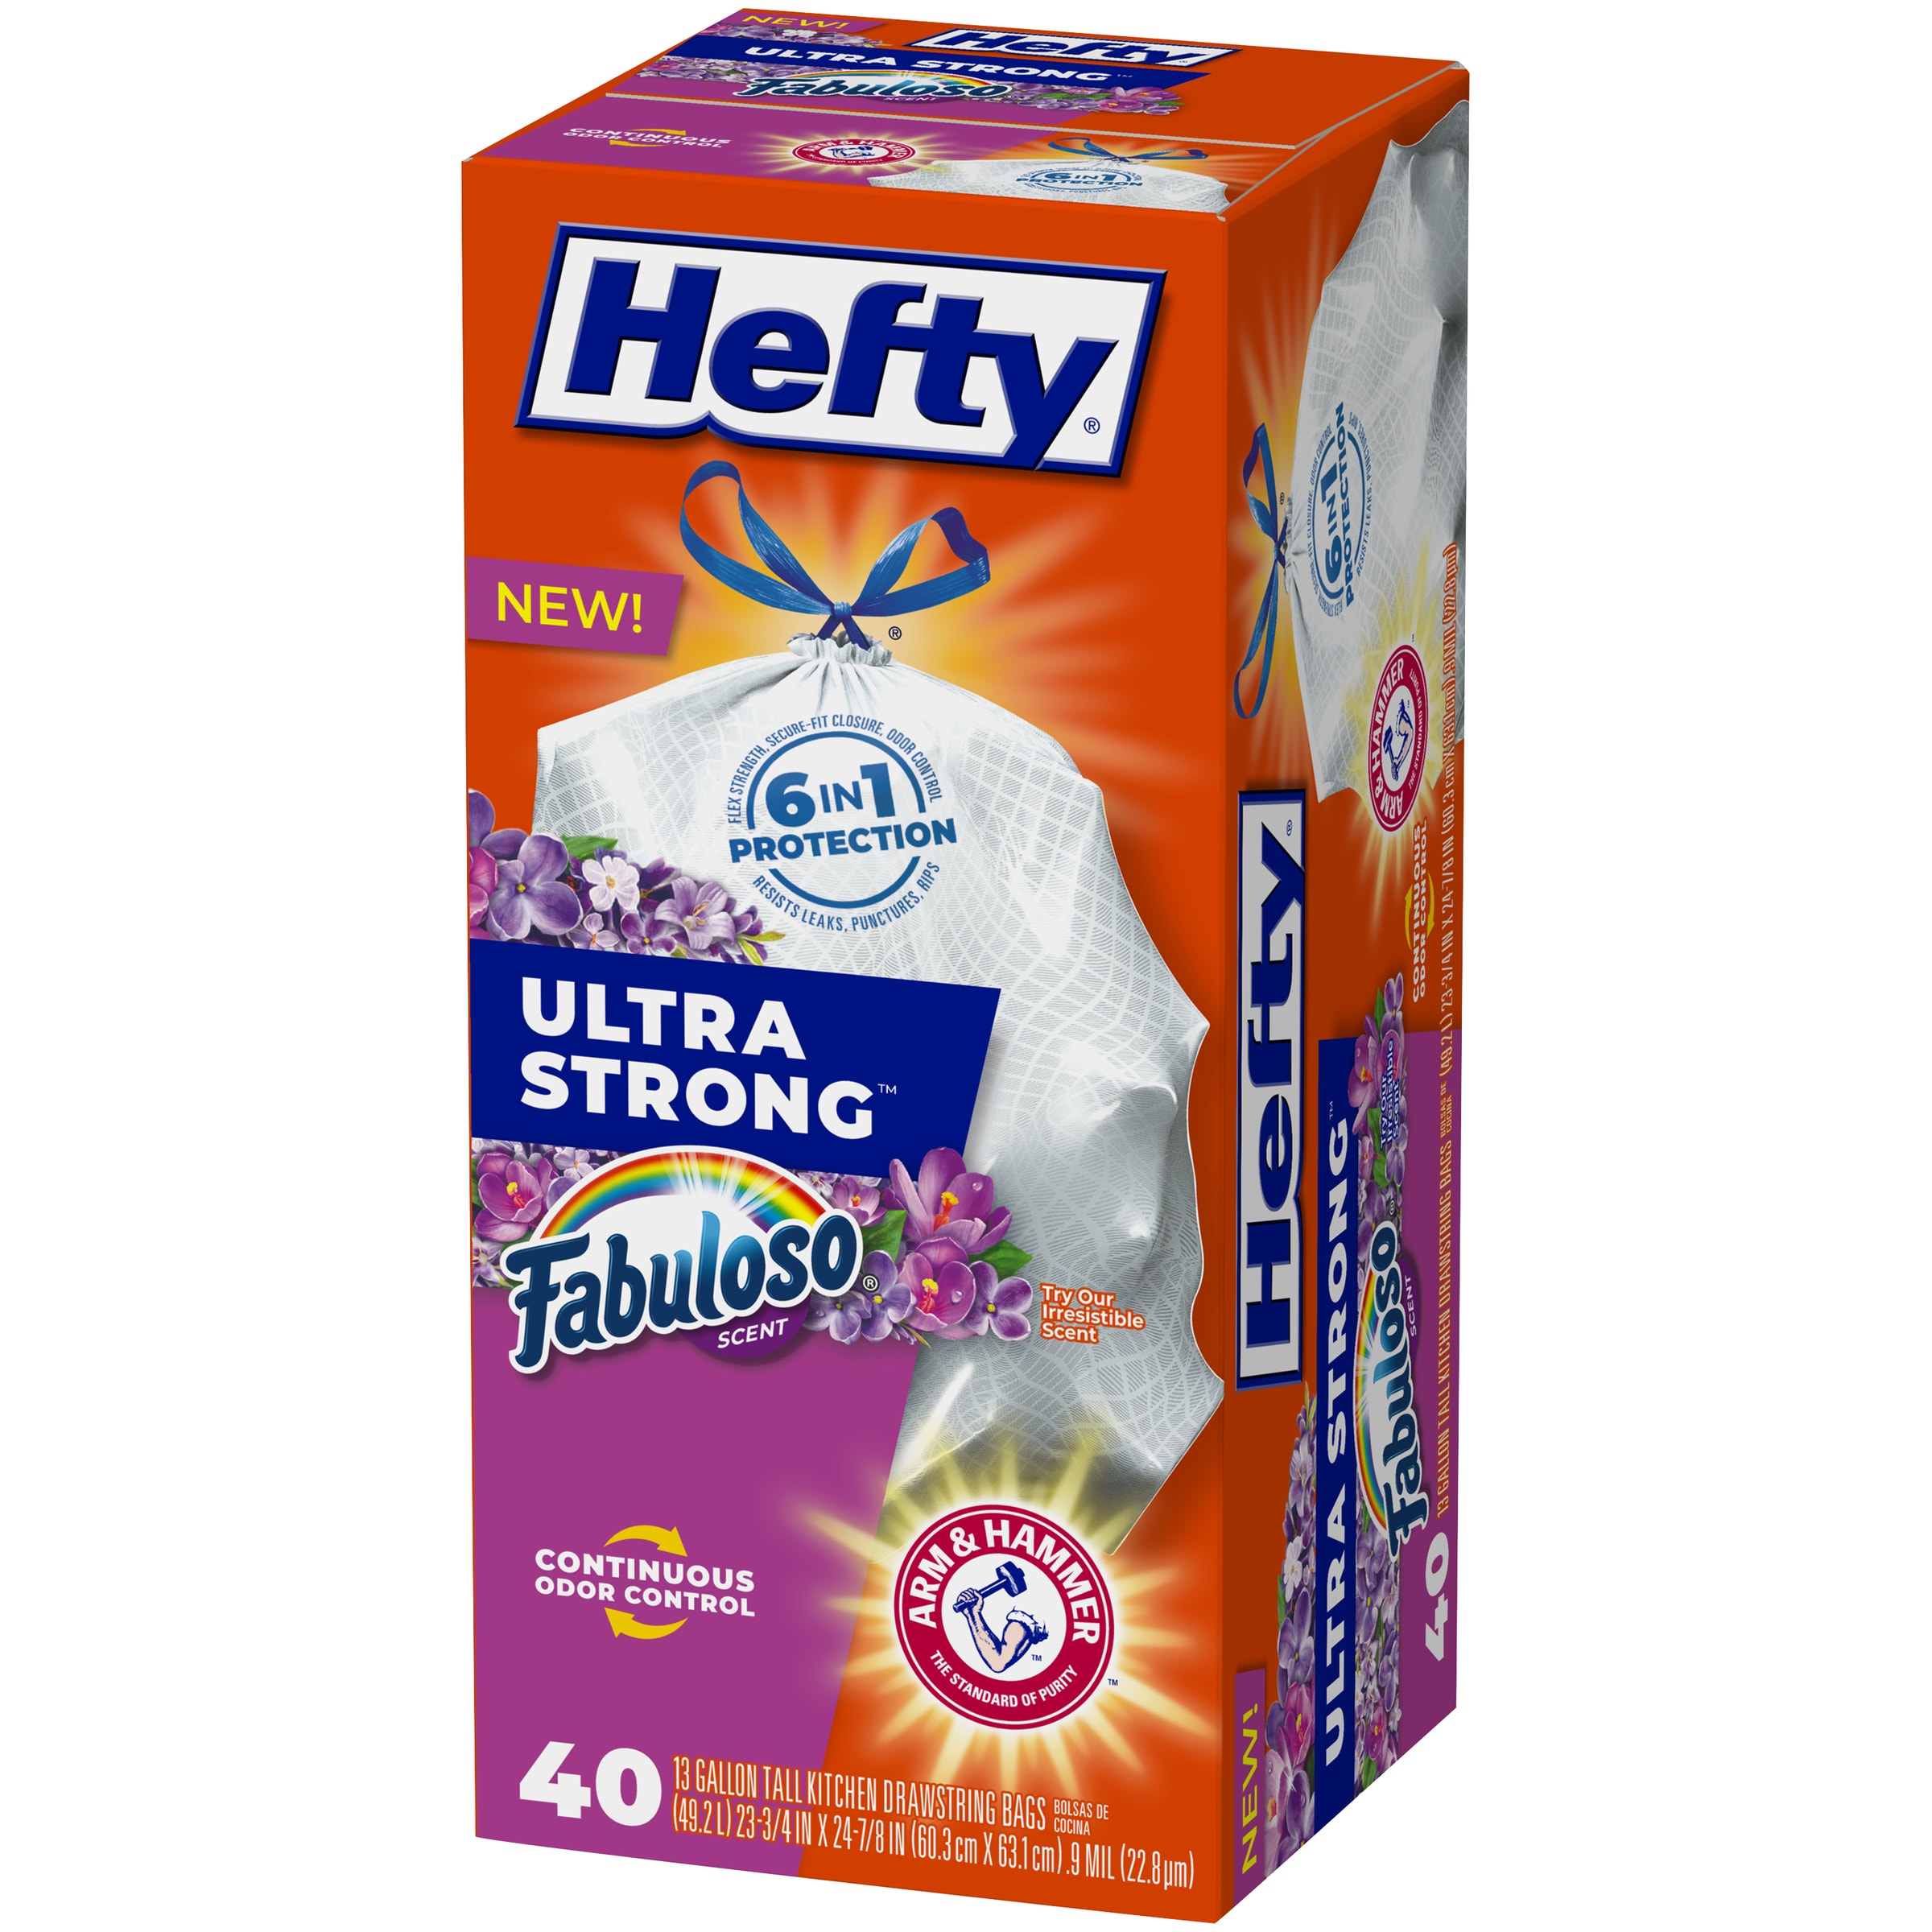 Hefty Small Garbage Bags, Drawstring, Fabuloso Scent, 4 Gallon, 20 Count, Size: 20 Small Trash Drawstring Bags